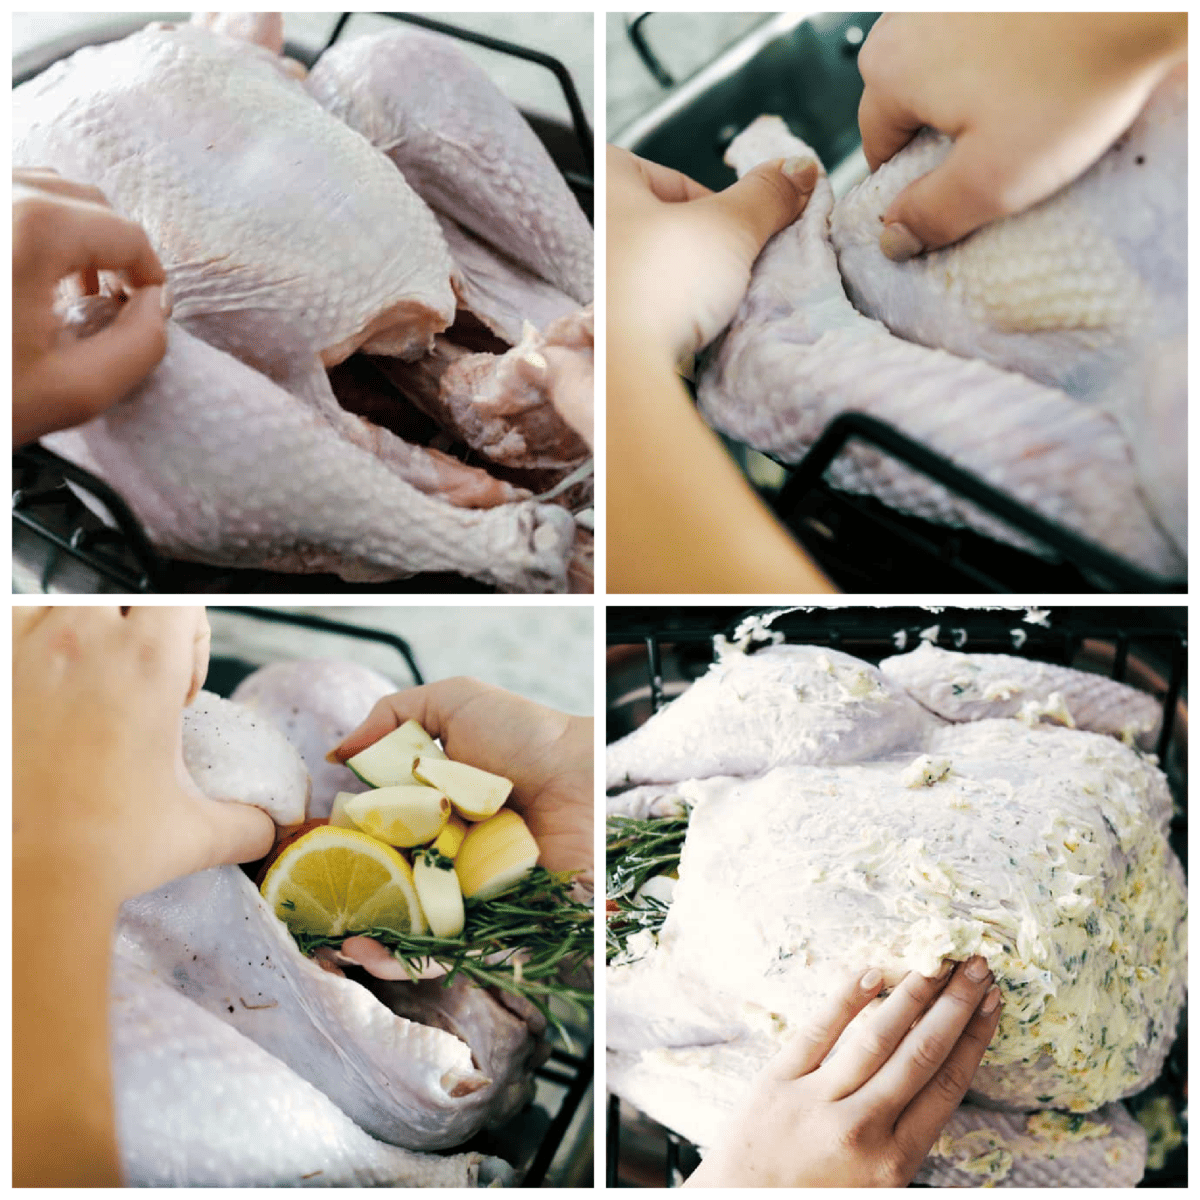 First photo of removing the giblets from the turkey. Second photo of tucking the legs under the bird. Third photo of stuffing the turkey with fruit and herbs. Fourth photo of rubbing the herb butter on the turkey.